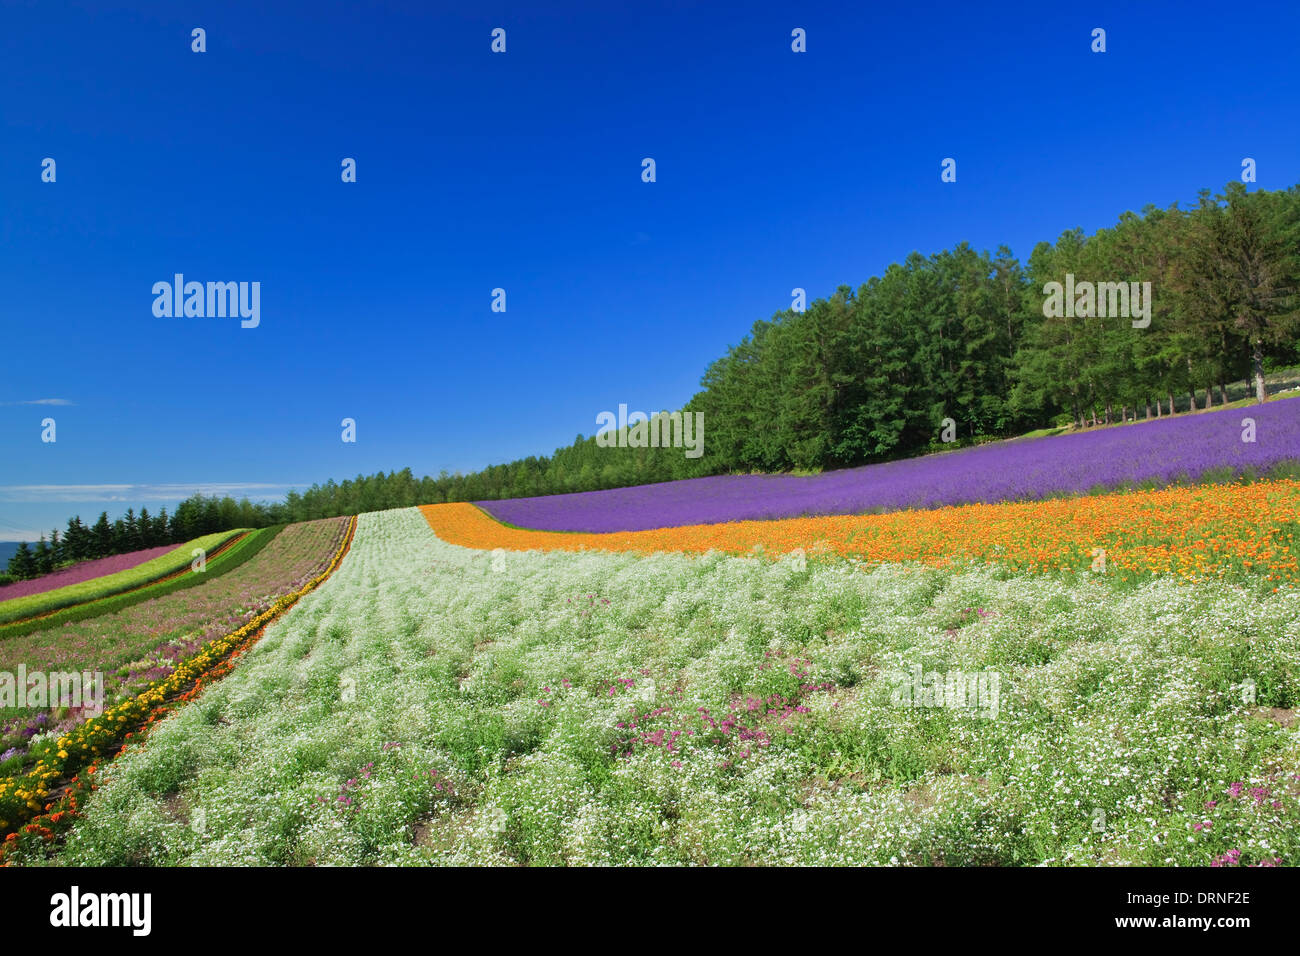 Colorful flower garden and blue sky in Hokkaido. Stock Photo